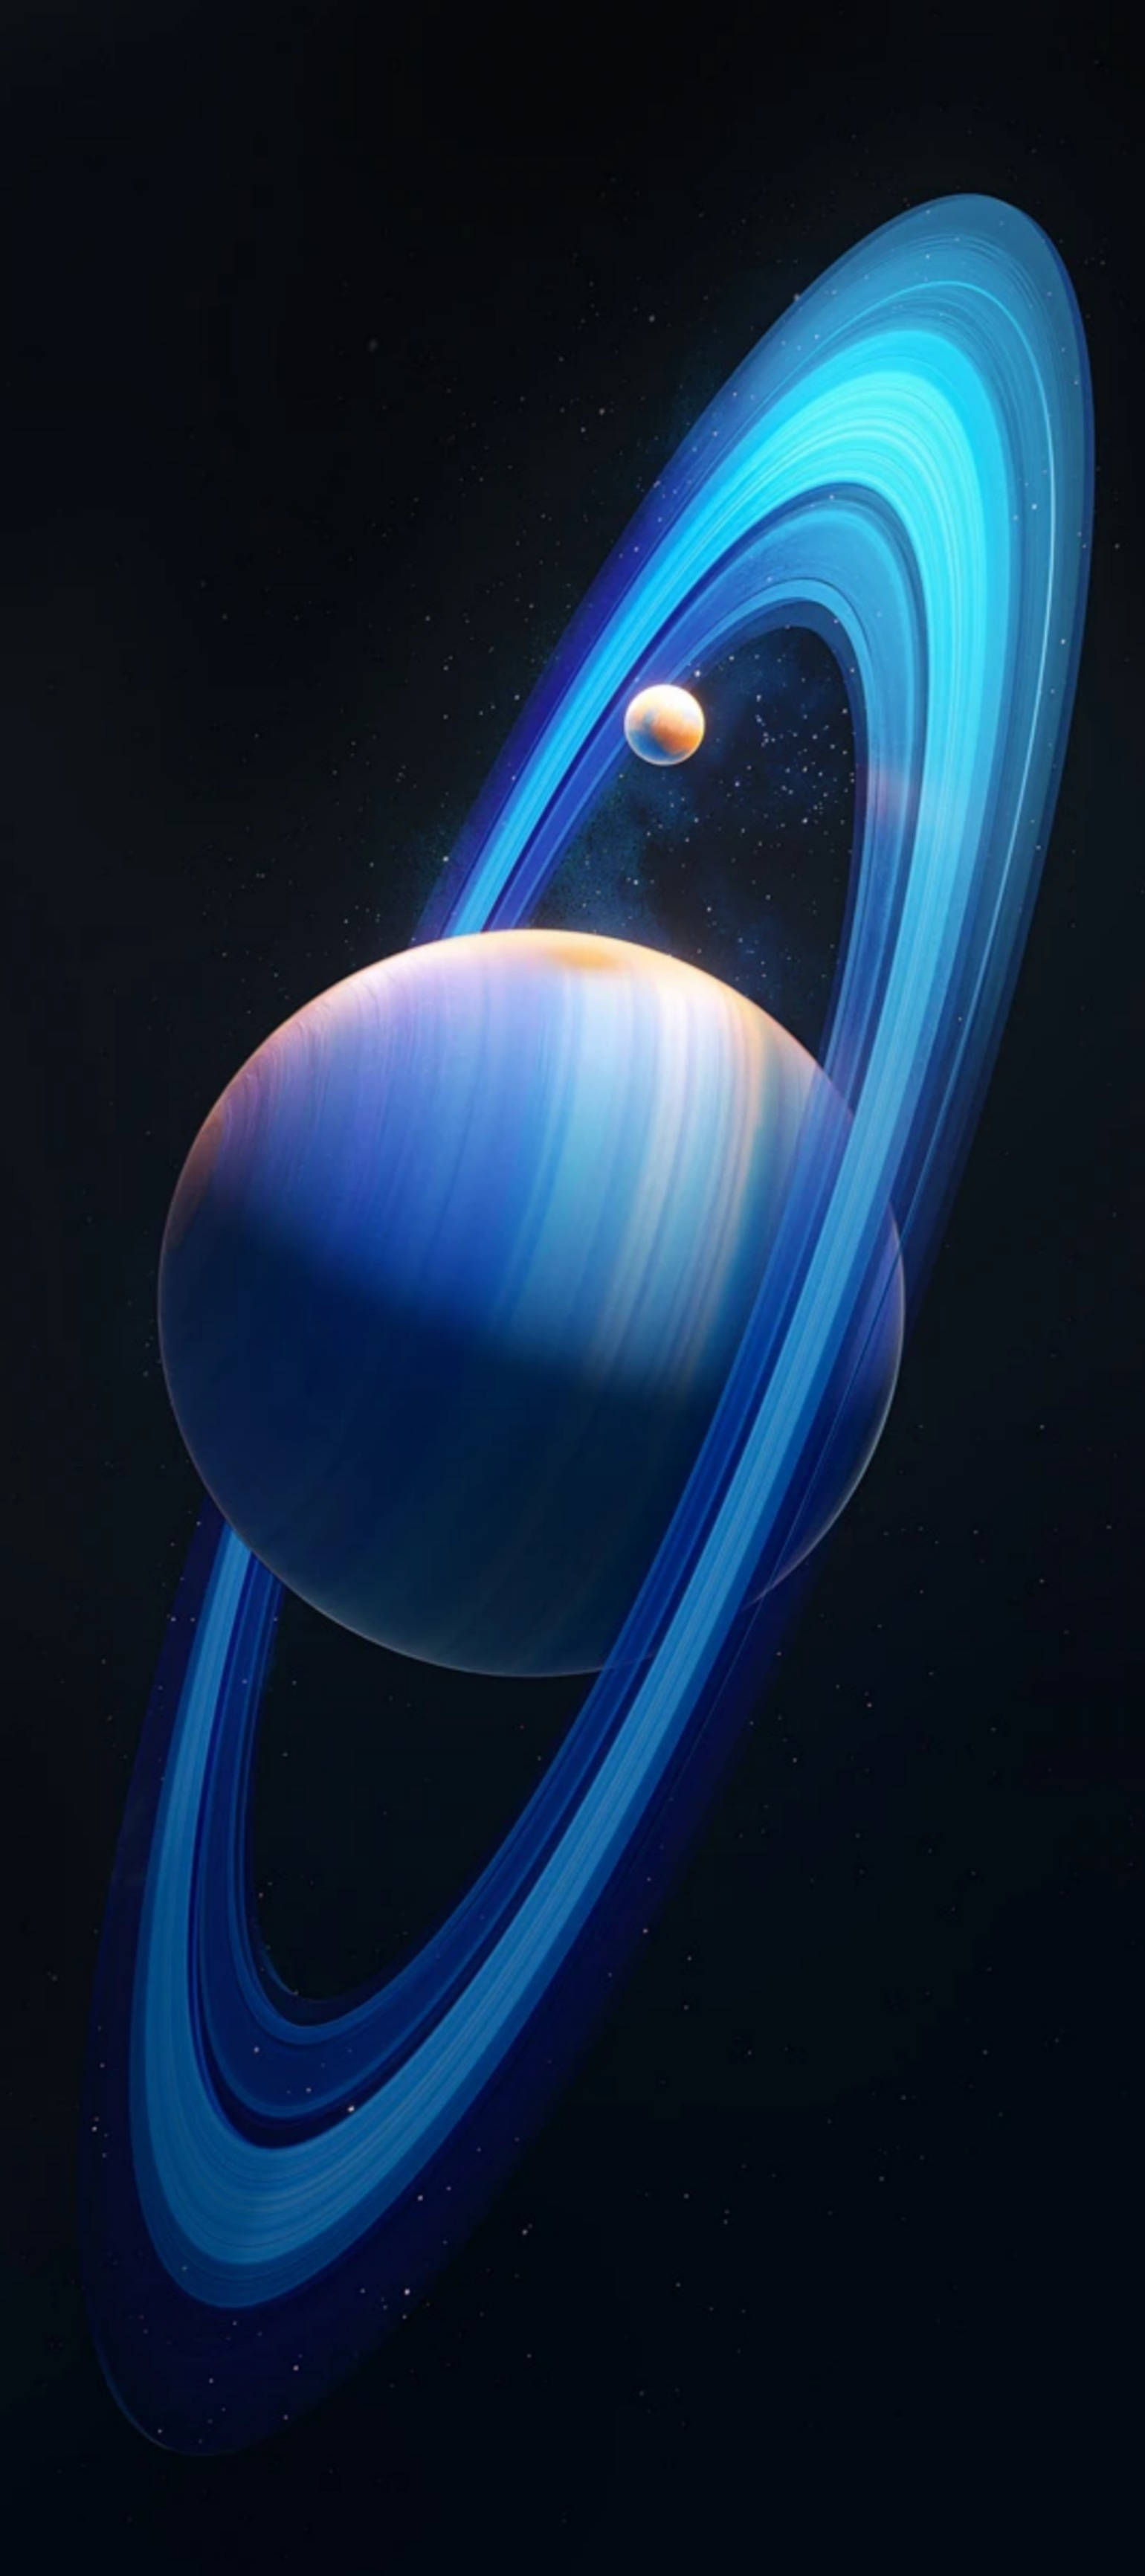 Infinix Zero In Unique Ultra Blue Design Against A Background Of The Saturn Planet Wallpaper